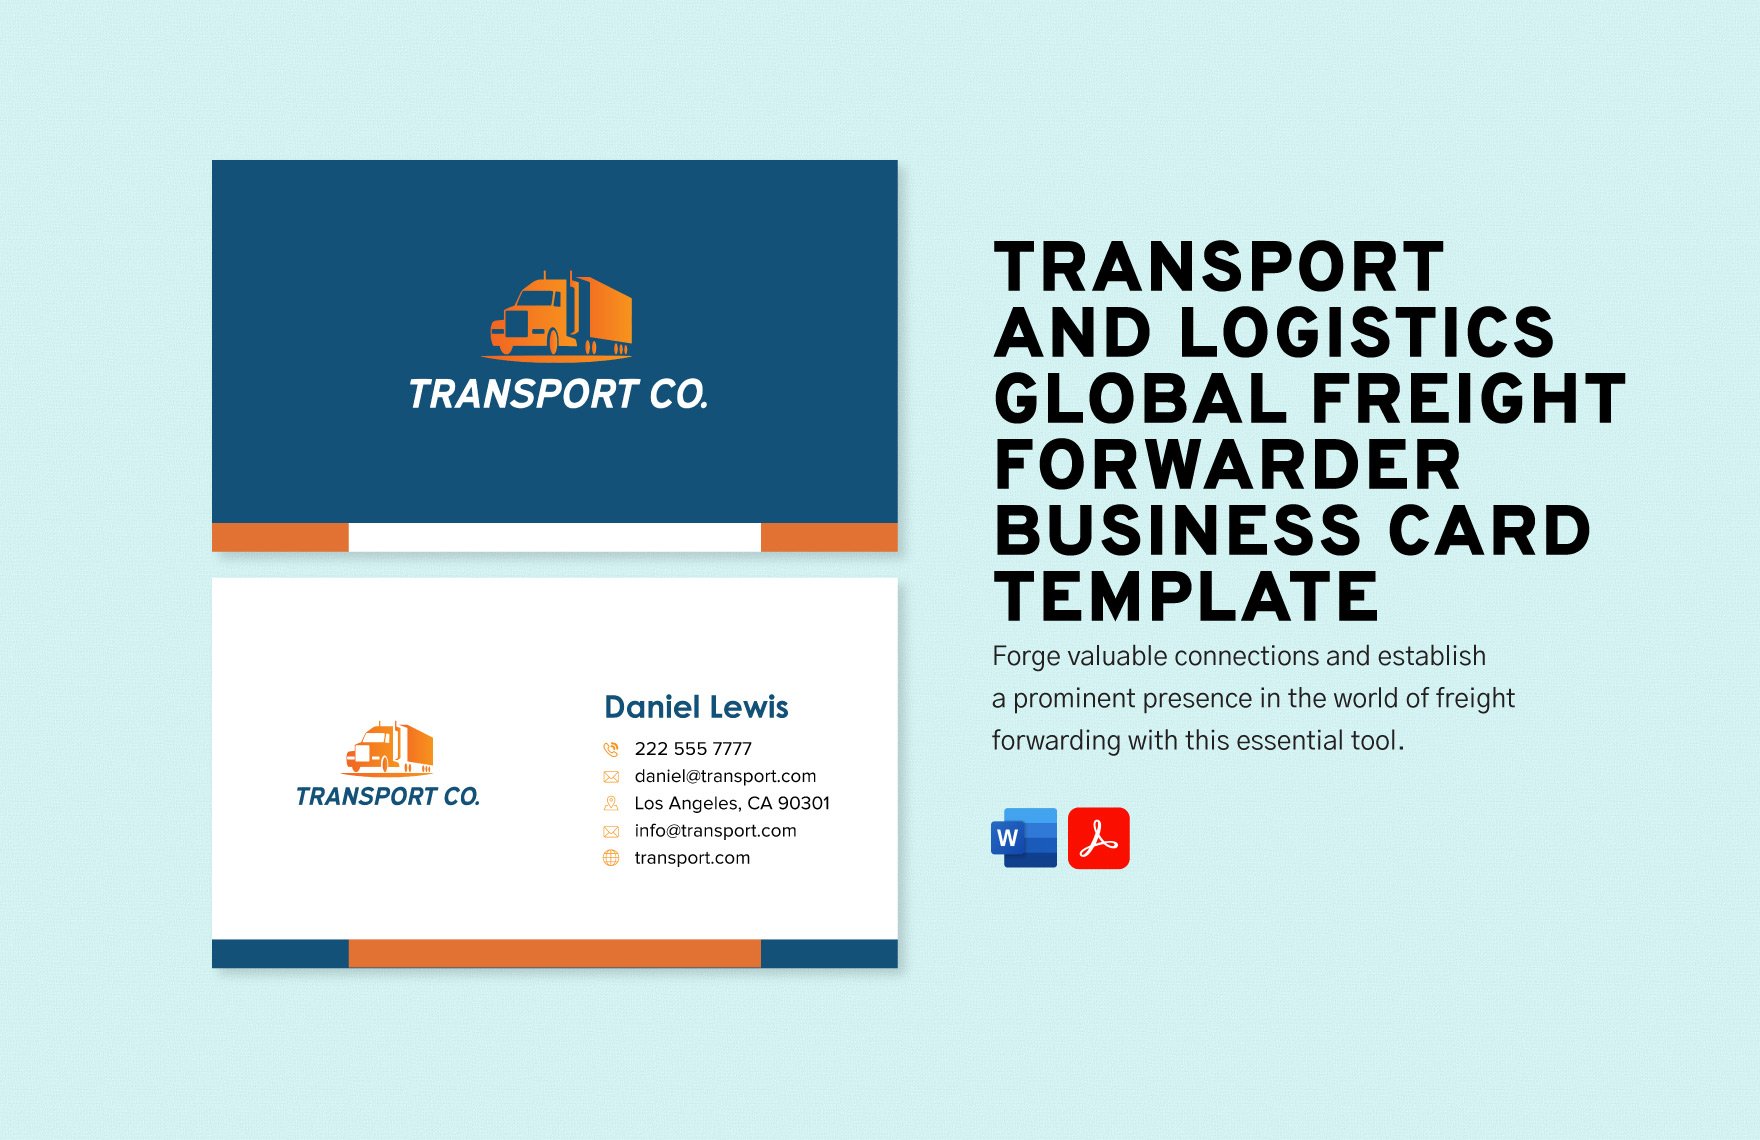 Transport and Logistics Global Freight Forwarder Business Card Template